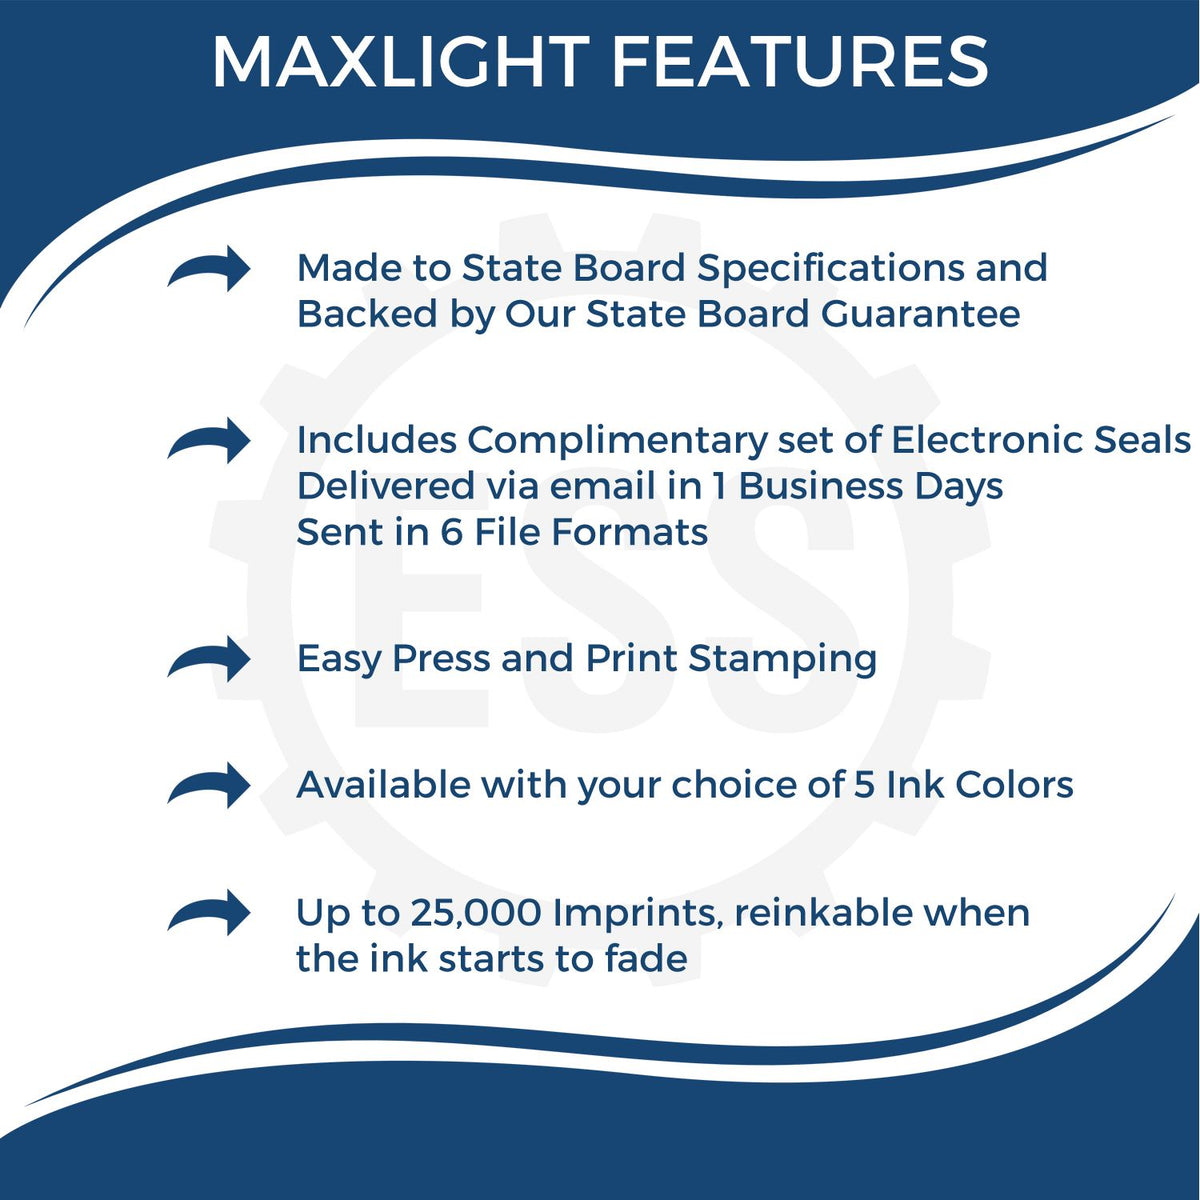 A picture of an infographic highlighting the selling points for the Premium MaxLight Pre-Inked Georgia Geology Stamp